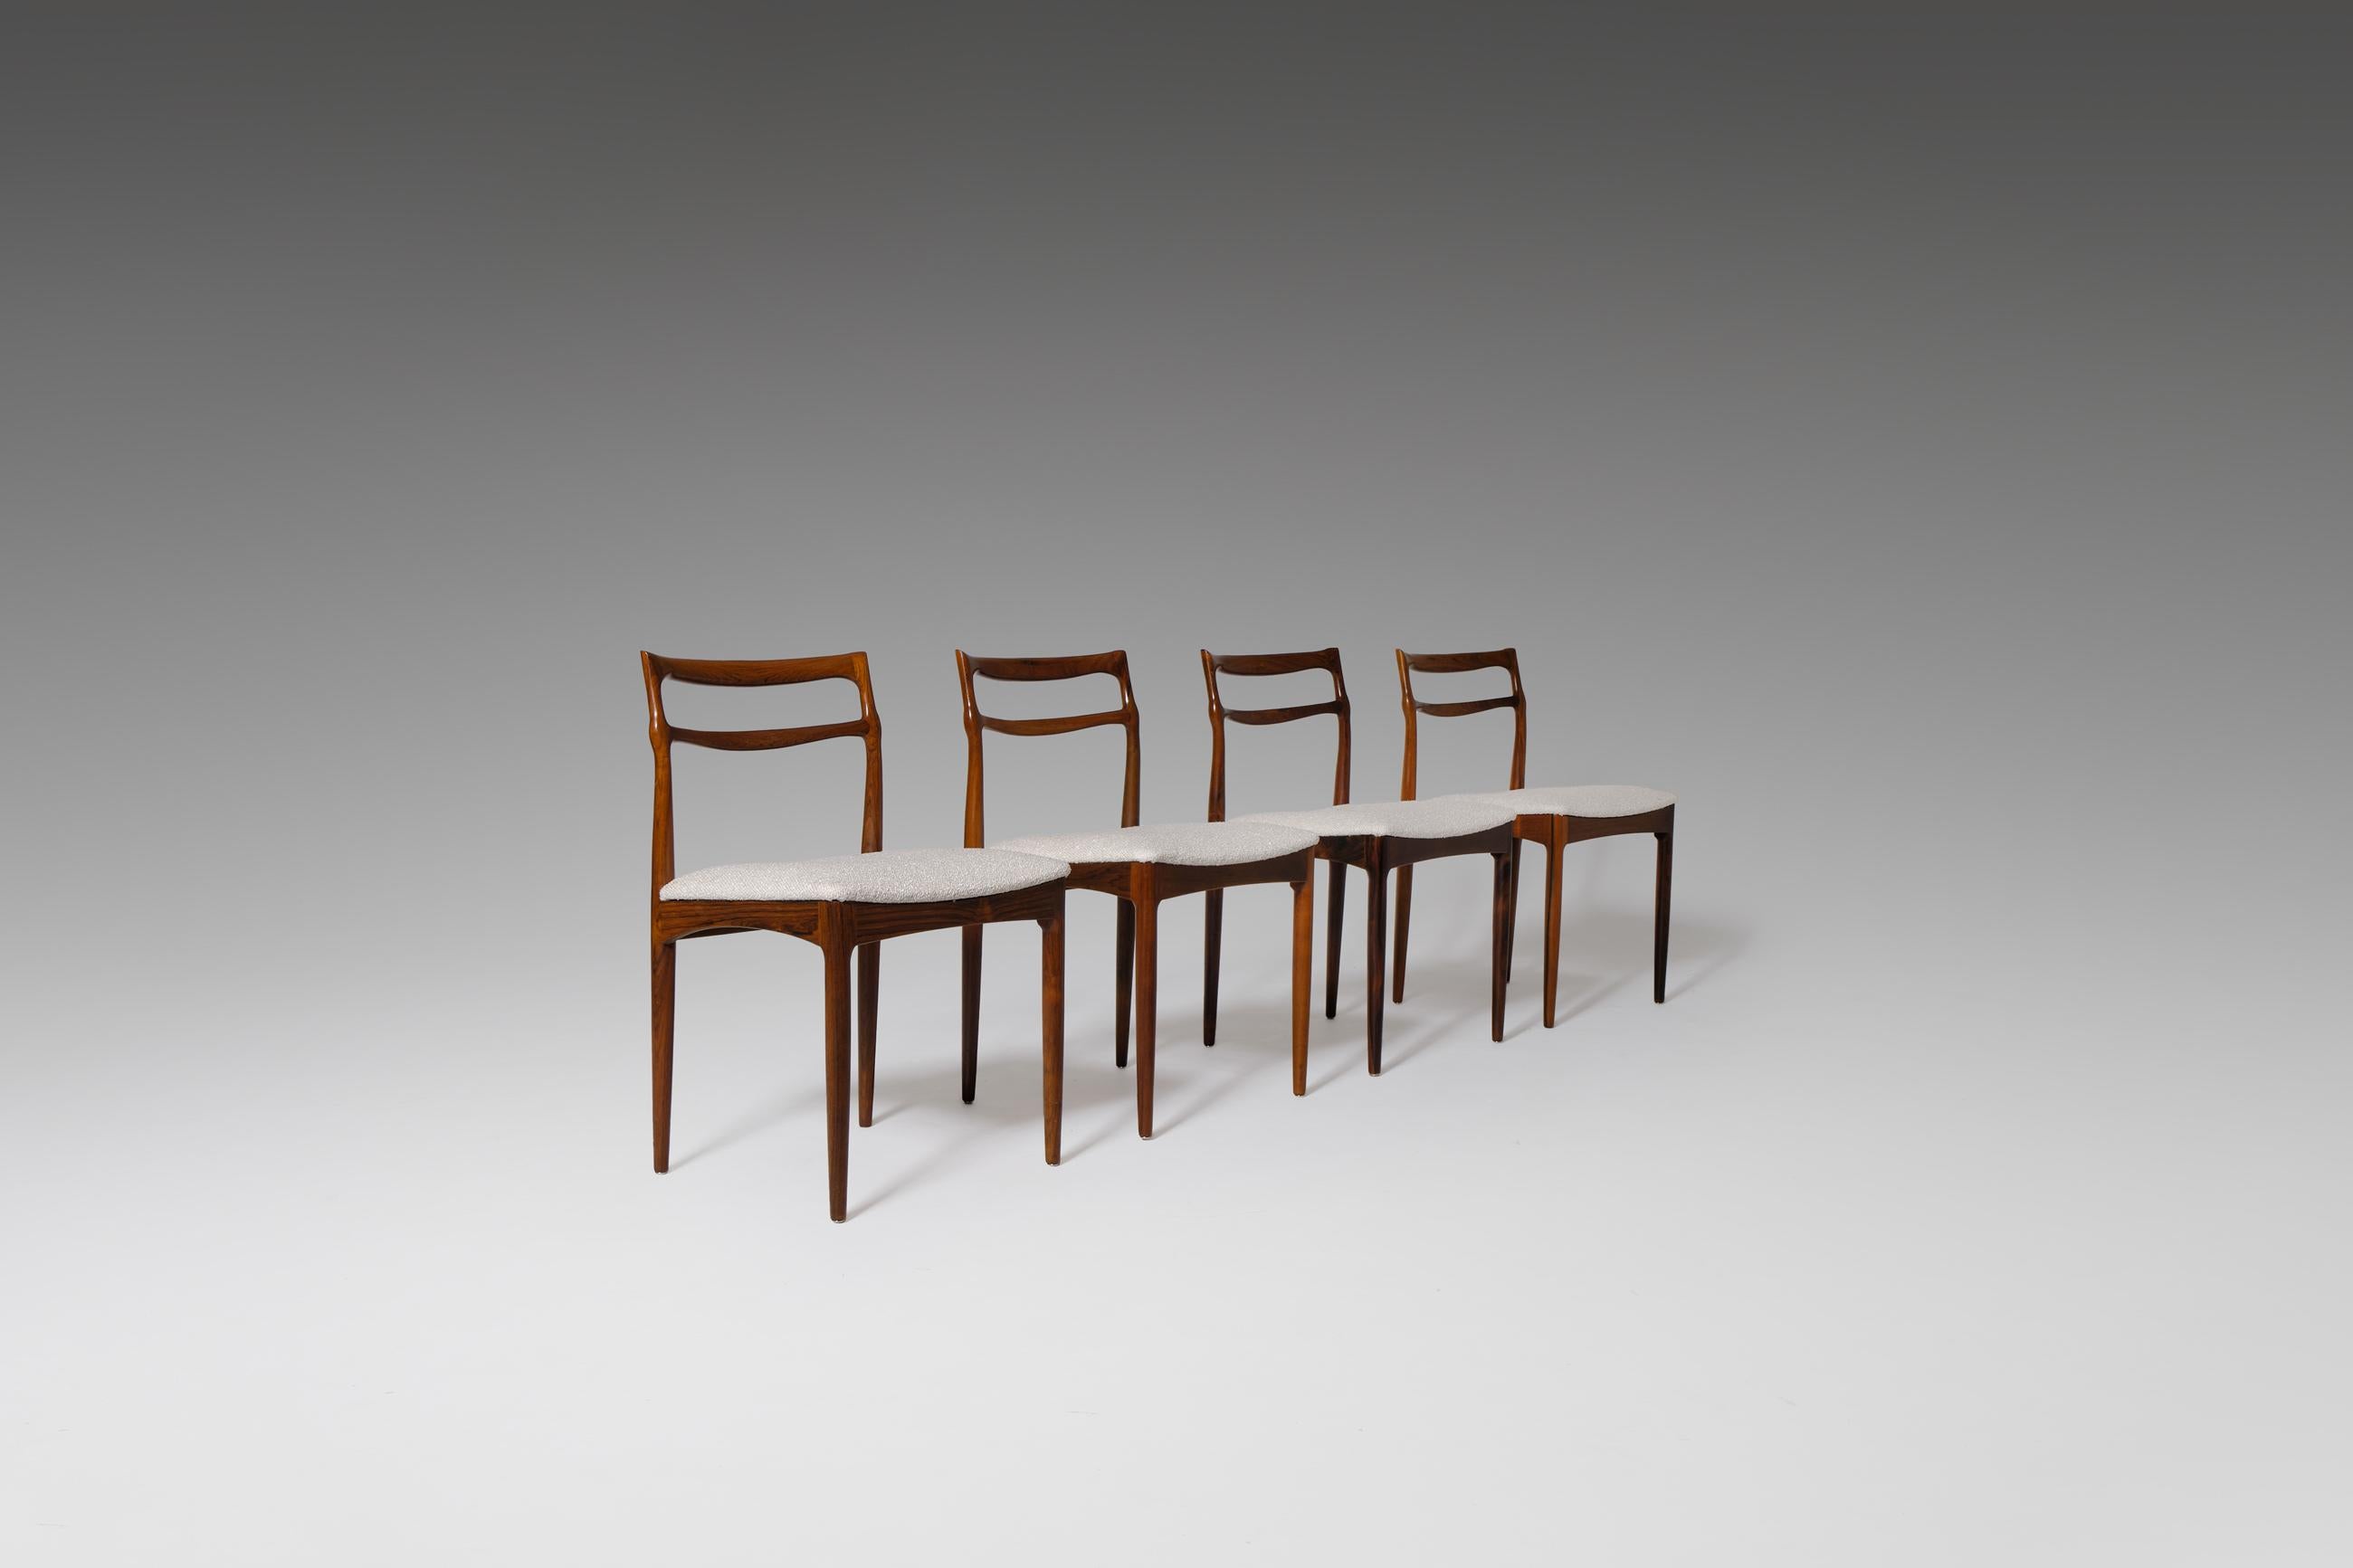 Elegant set of four dining chairs by Johannes Andersen, produced by the Christian Linneberg Møbelkfabrik, Denmark, 1960s. The chairs have a beautiful sculptural carved solid rosewood frame and show a variety of interesting details, such as the